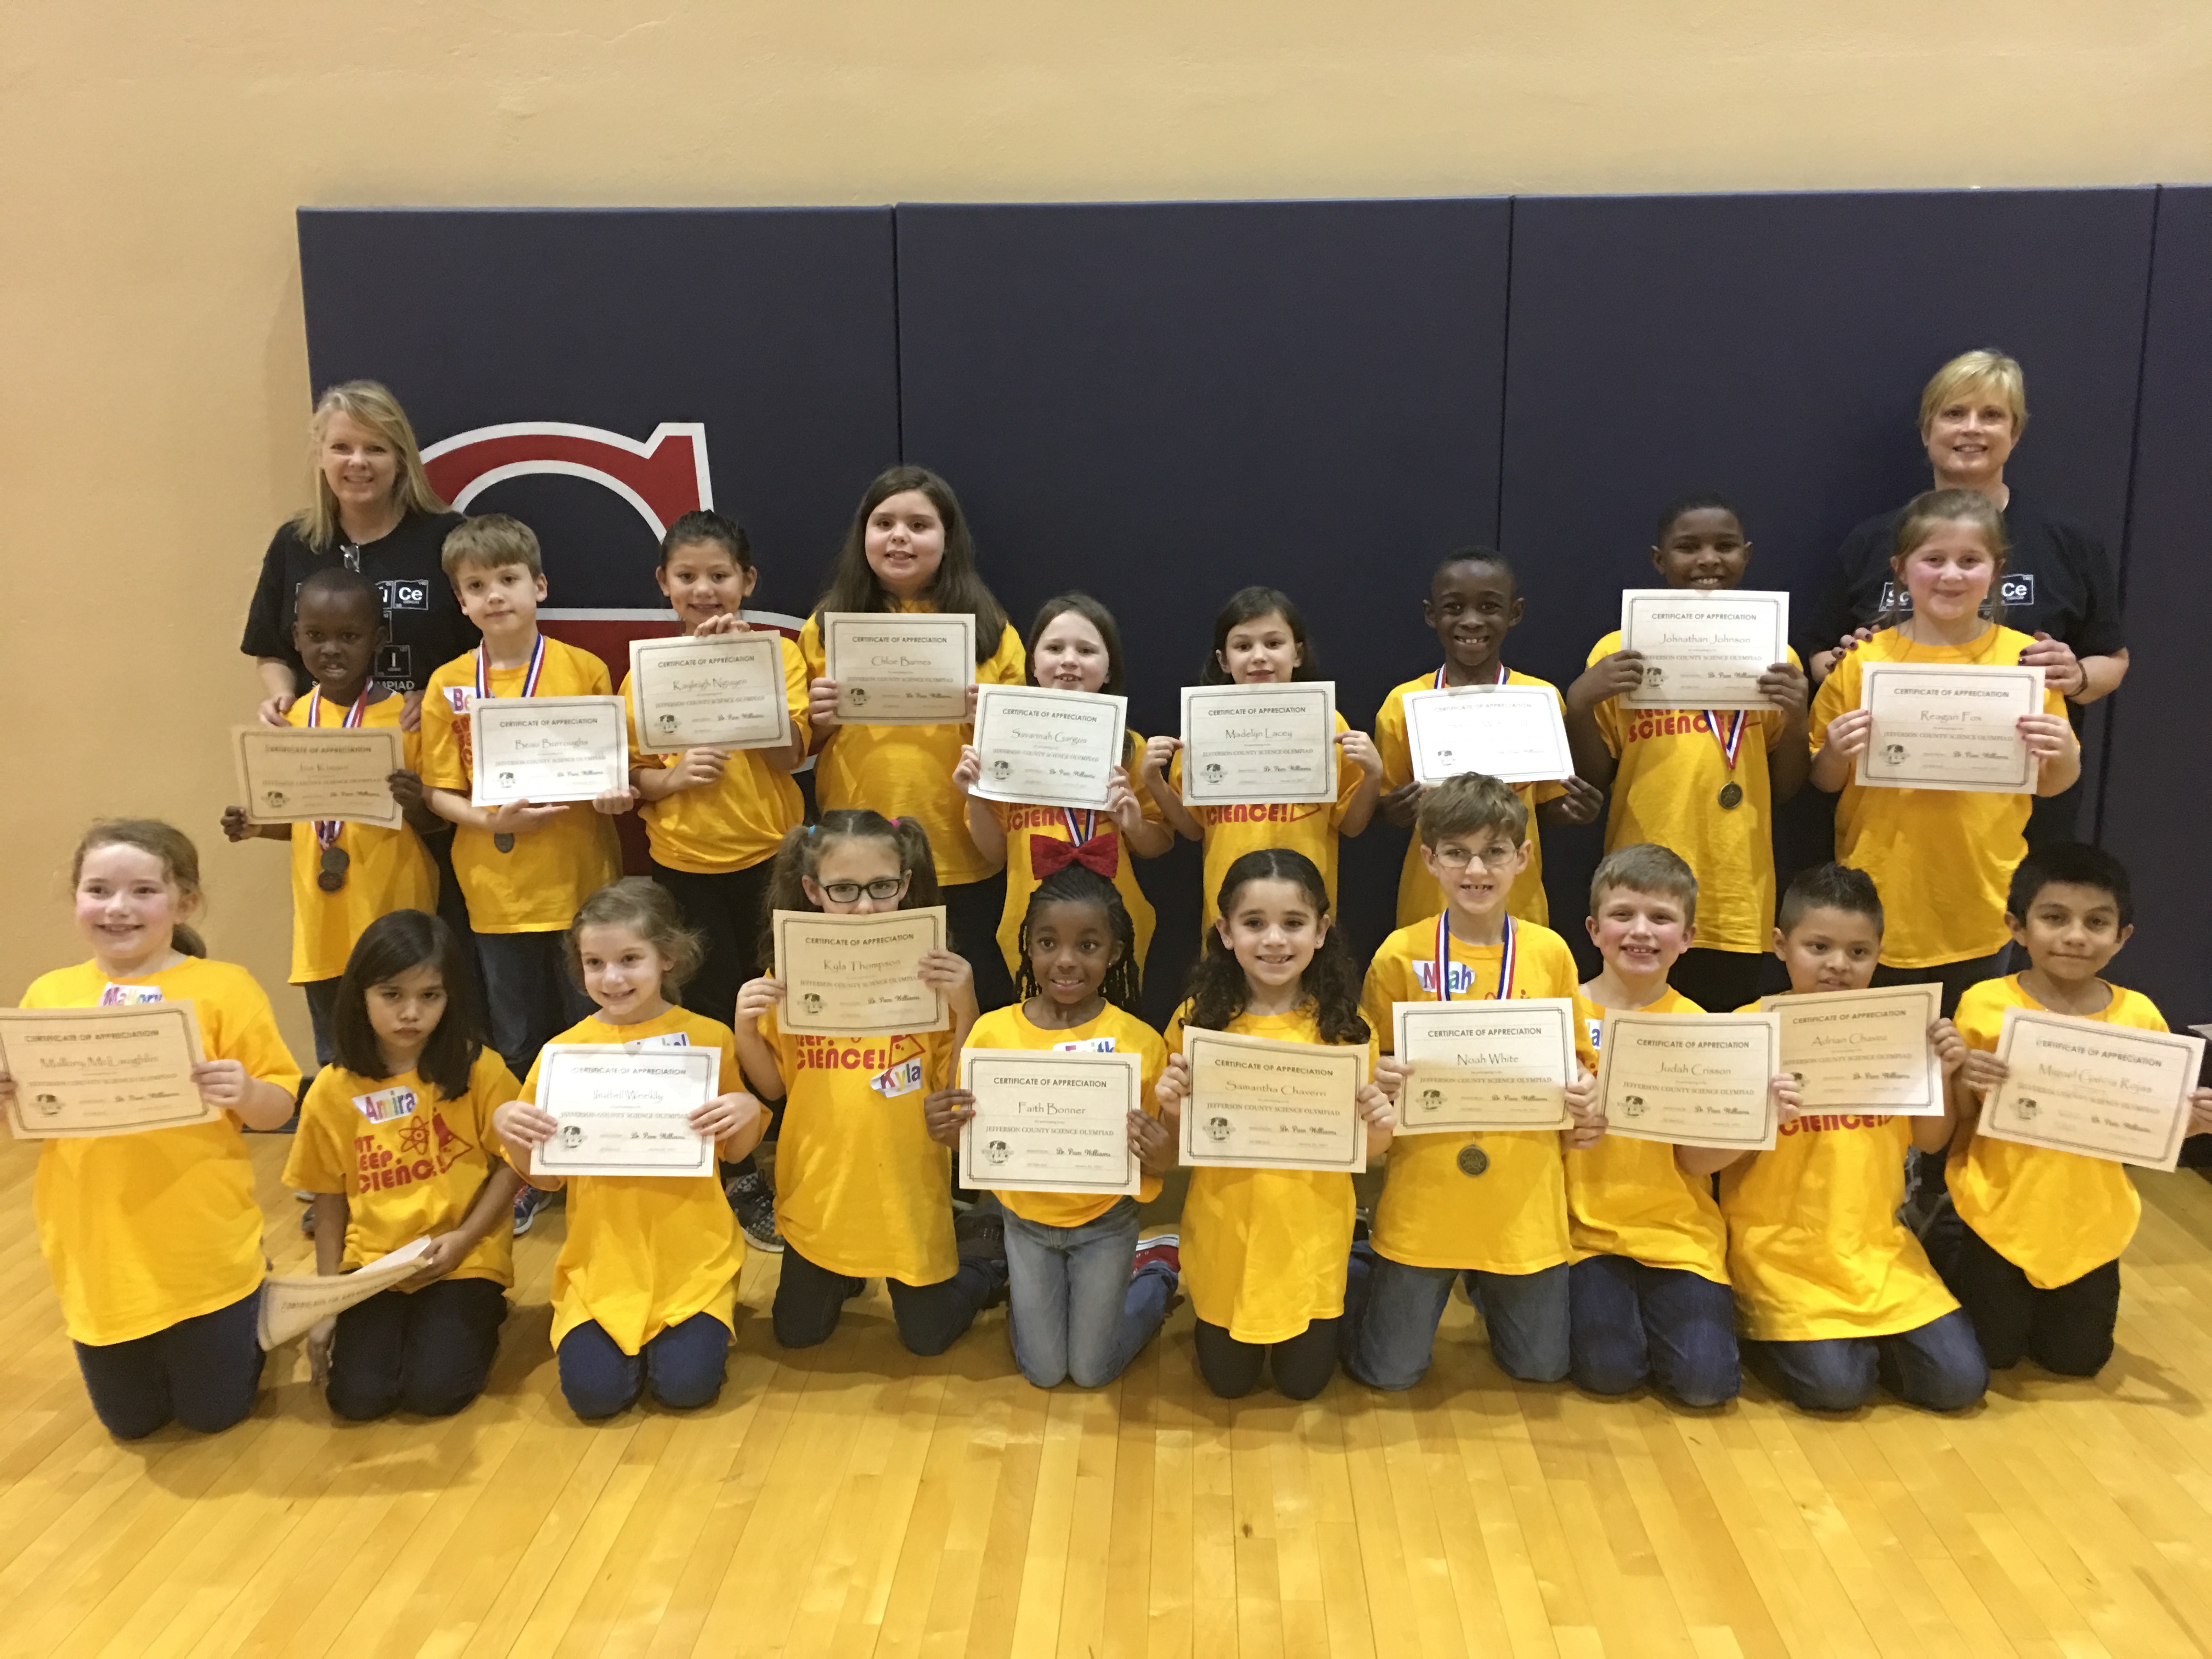 Pinson Elementary students take home big prizes at science olympiad